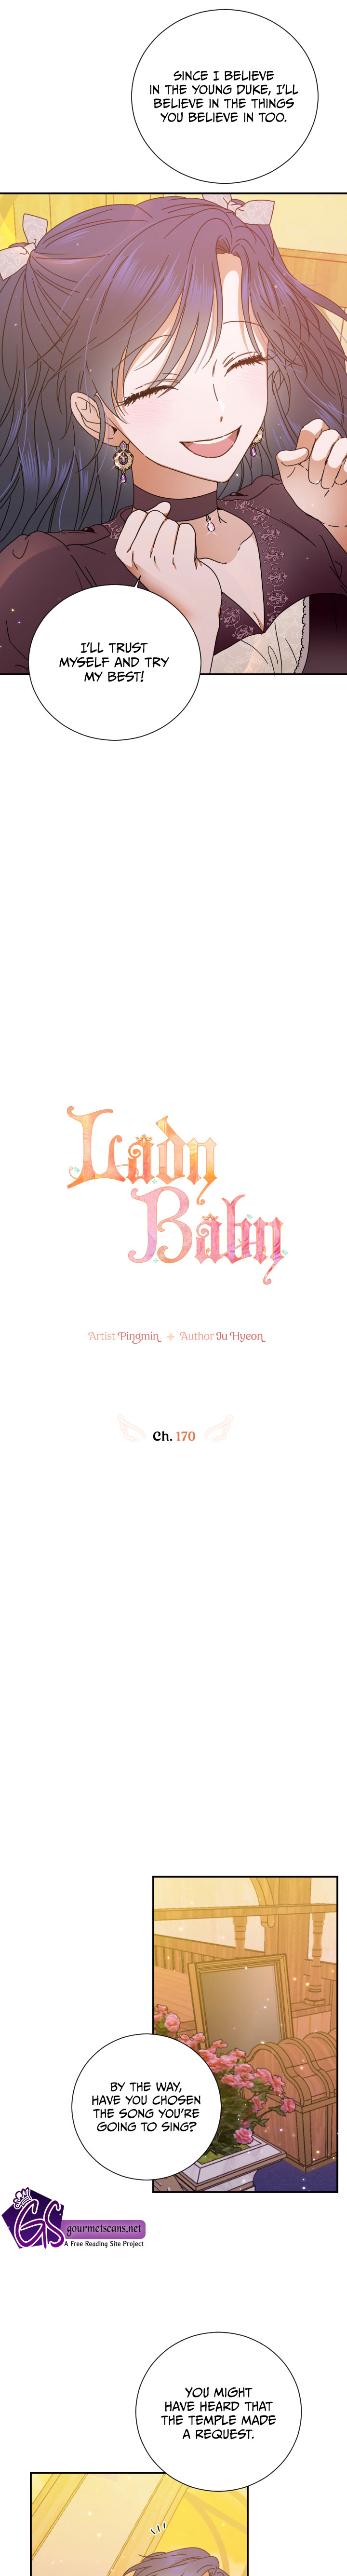 Lady Baby - Chapter 170 Page 4